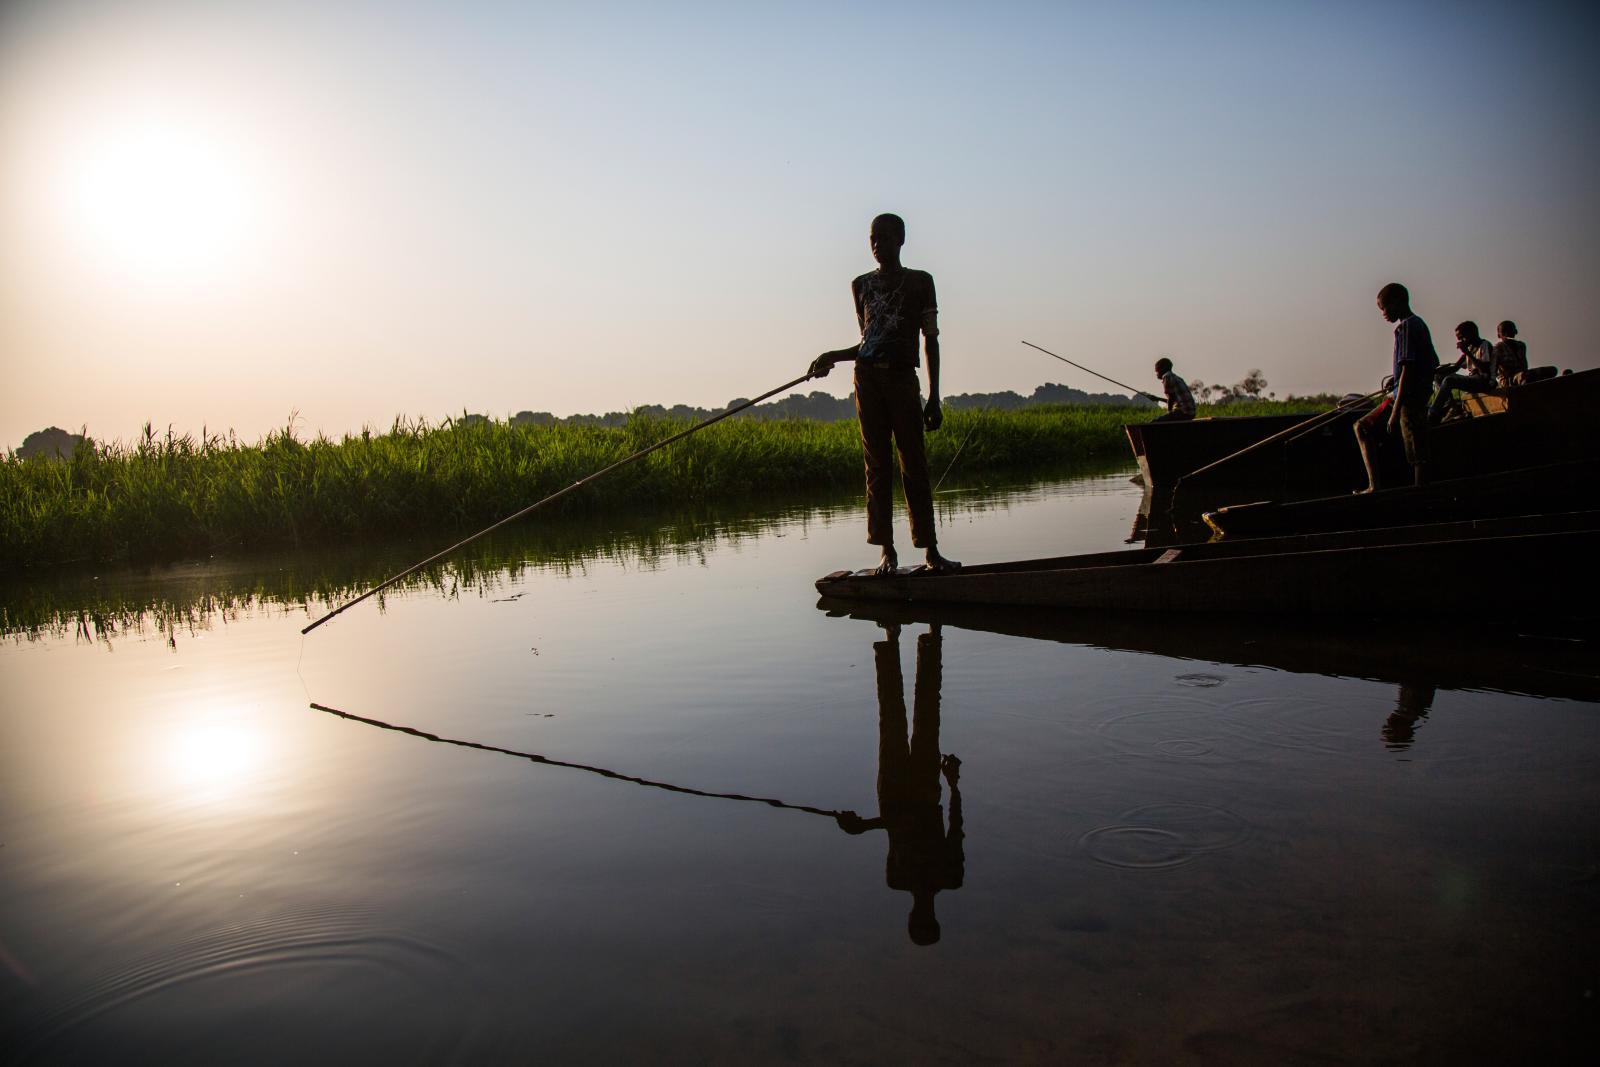 South Sudan | Fisheries on the White Nile river